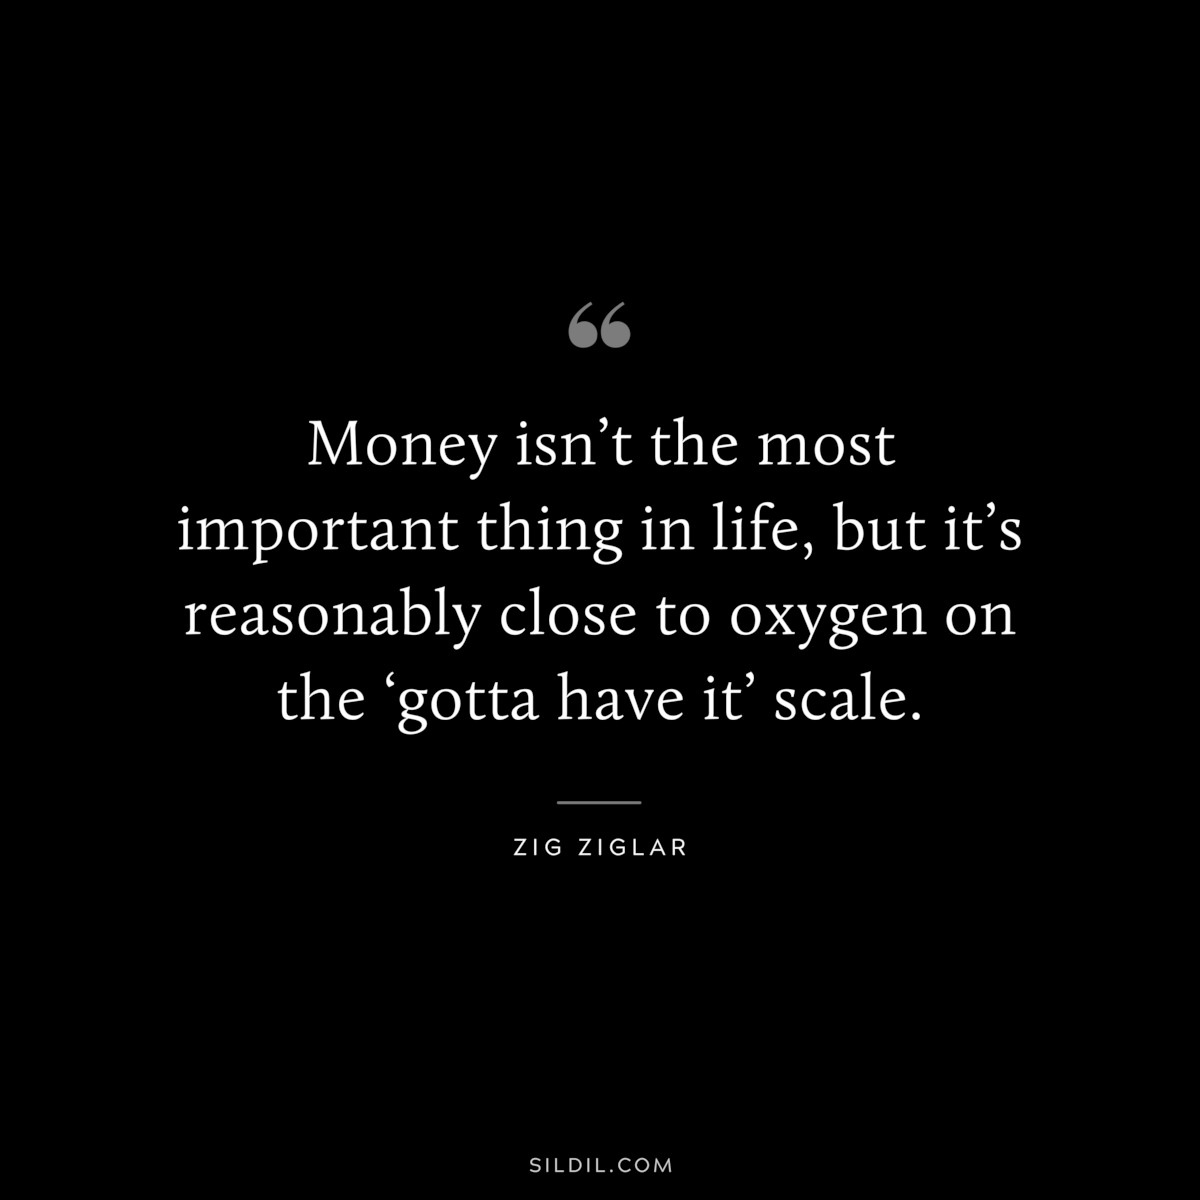 Money isn’t the most important thing in life, but it’s reasonably close to oxygen on the ‘gotta have it’ scale. ― Zig Ziglar